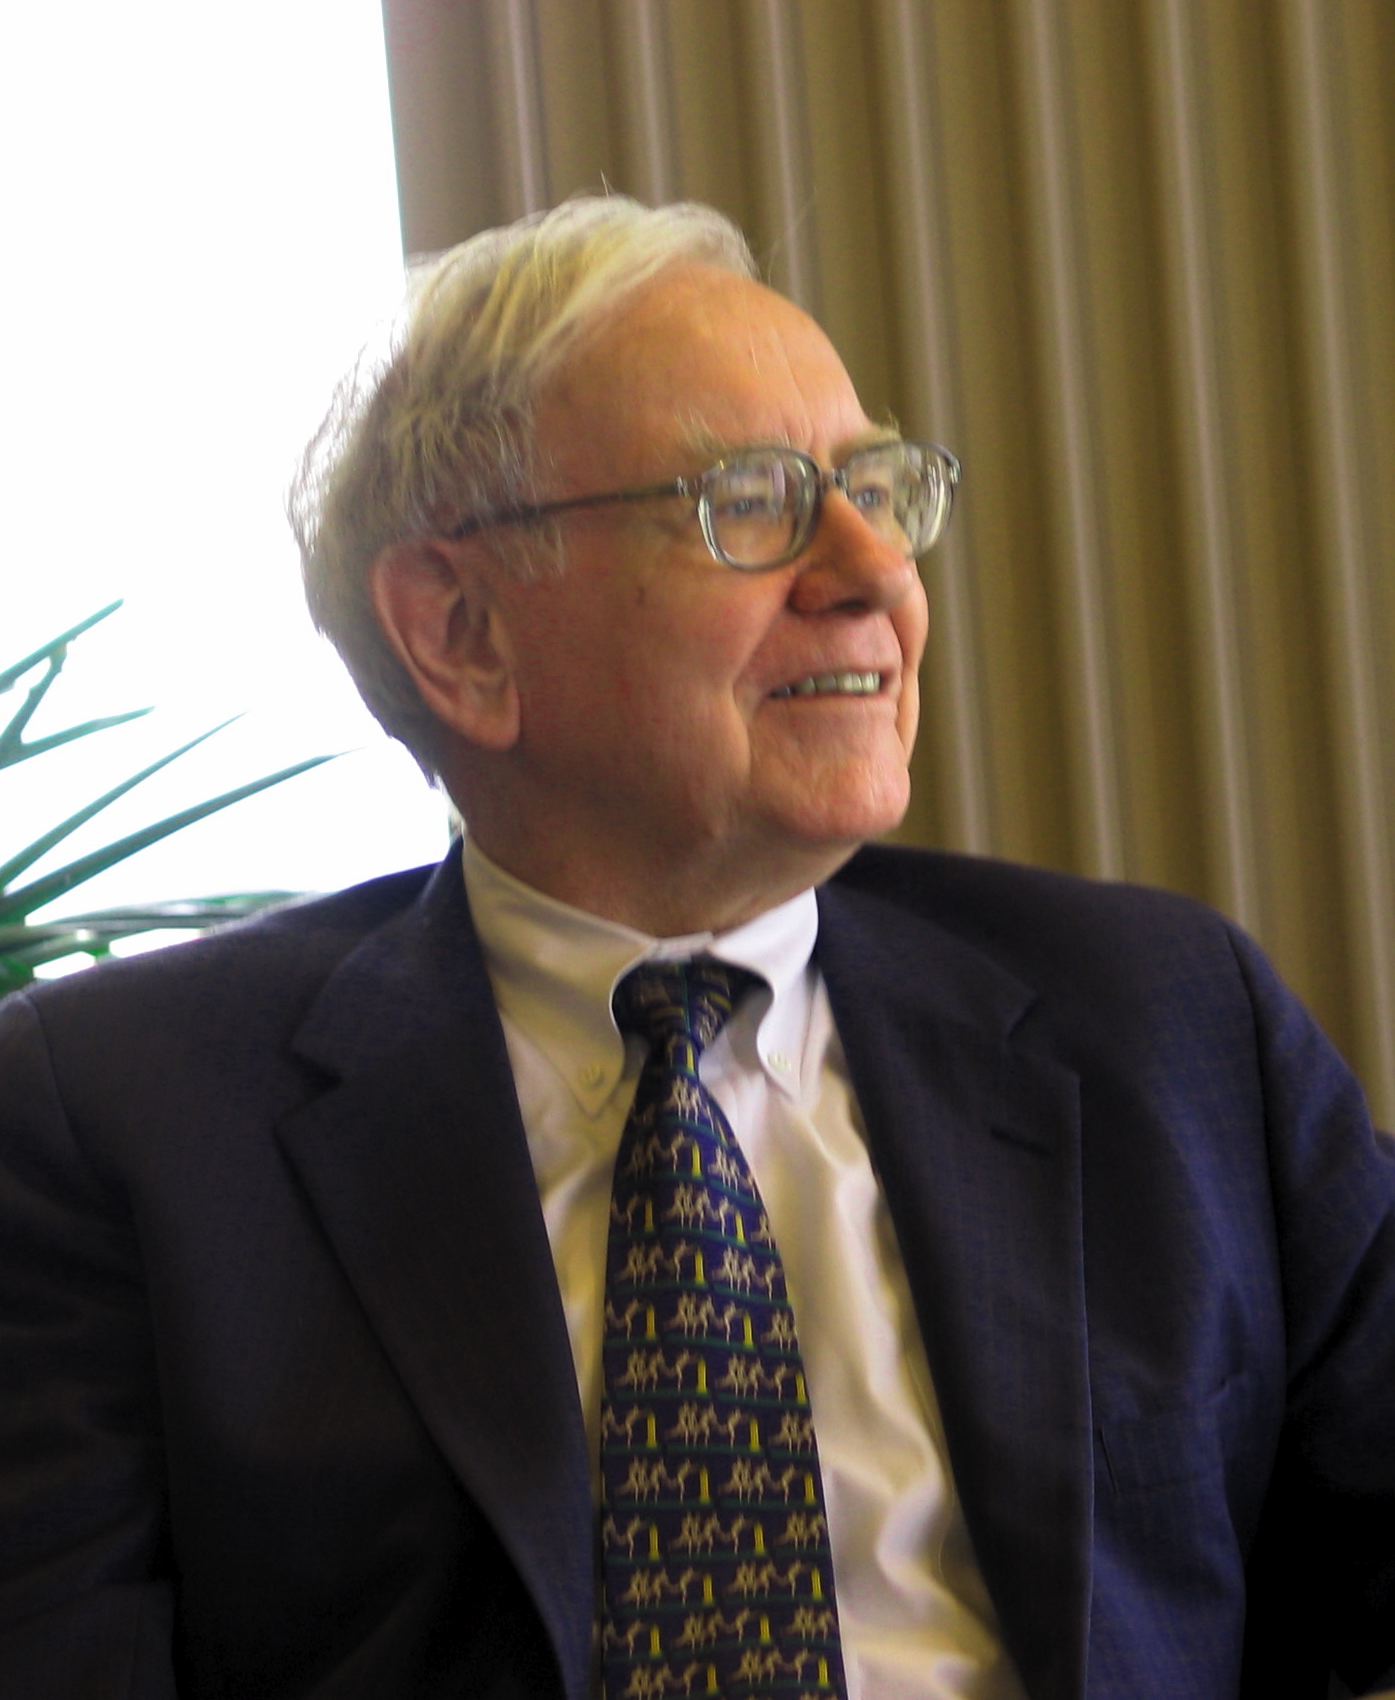 Warren Buffet Isn’t Jewish, But His Lessons Are